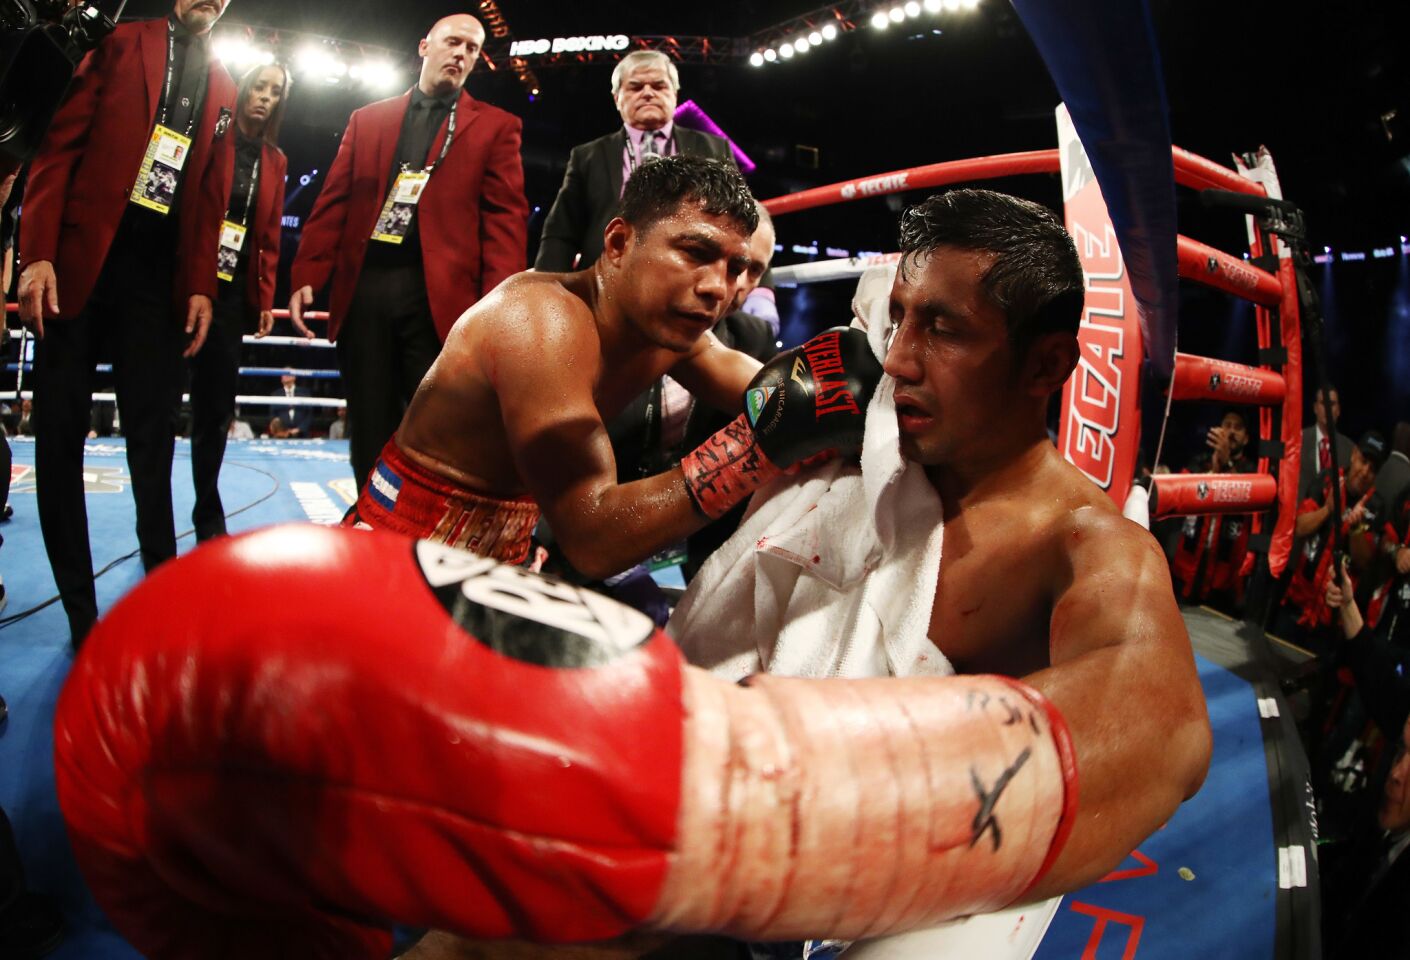 Roman Gonzalez consoles Moises Fuentes after knocking him out in the first round during their super flyweight bout at T-Mobile Arena on September 15, 2018 in Las Vegas, Nevada.